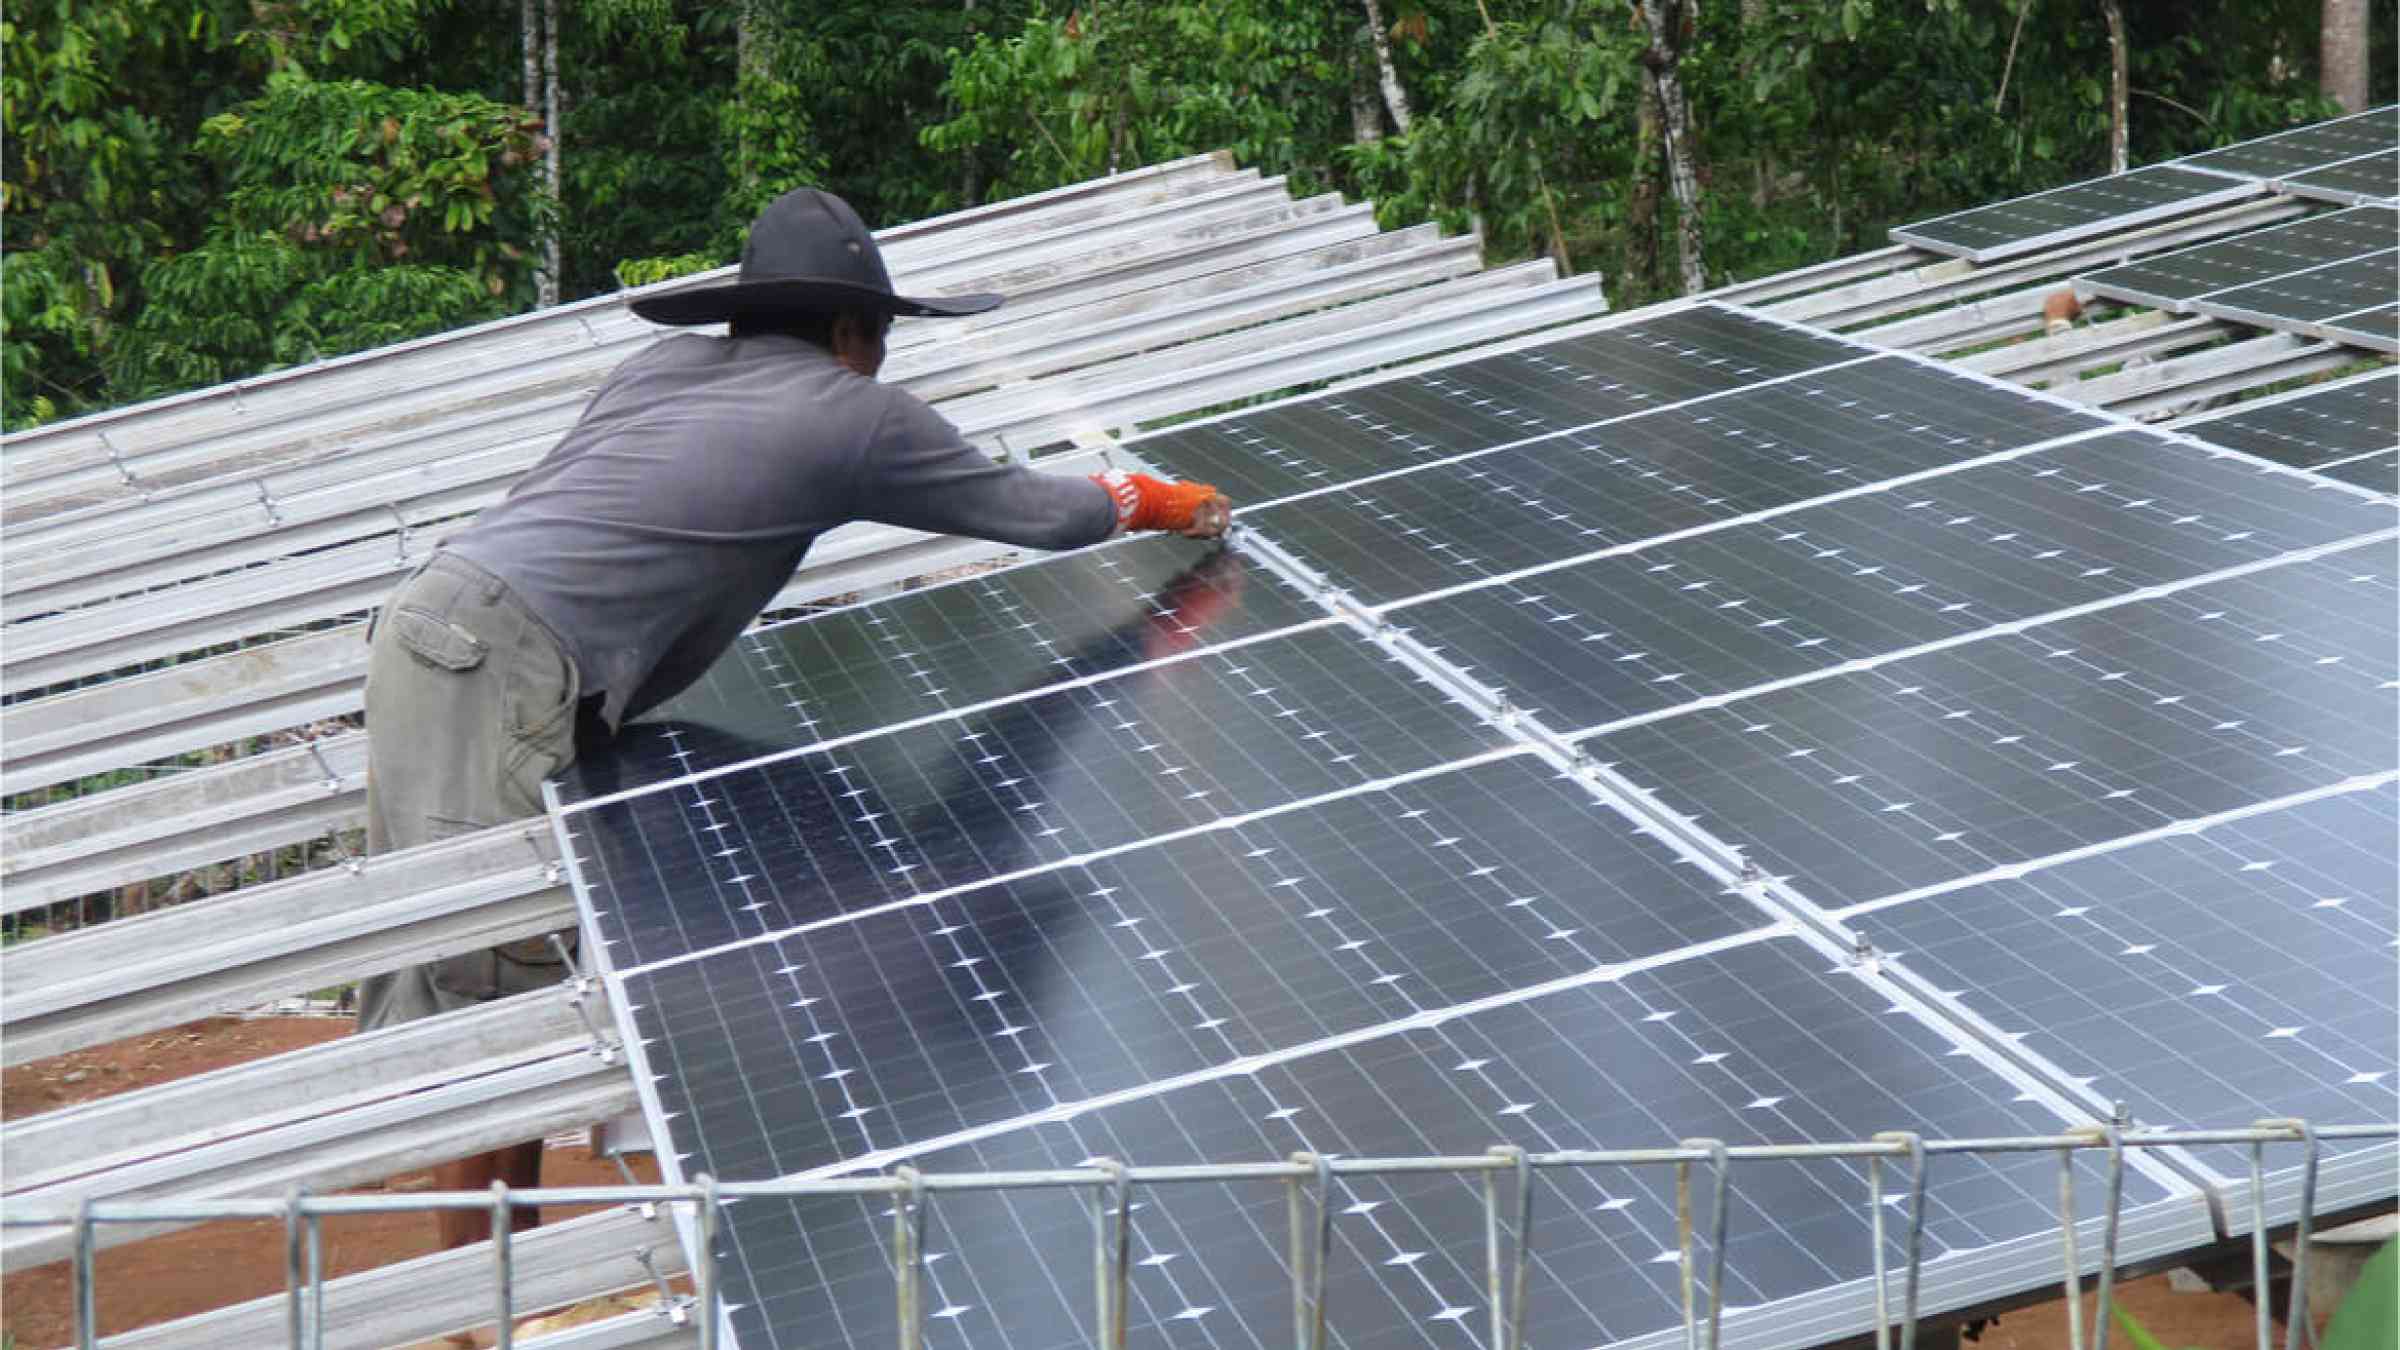 The process of installing a photovoltaic system in rural areas